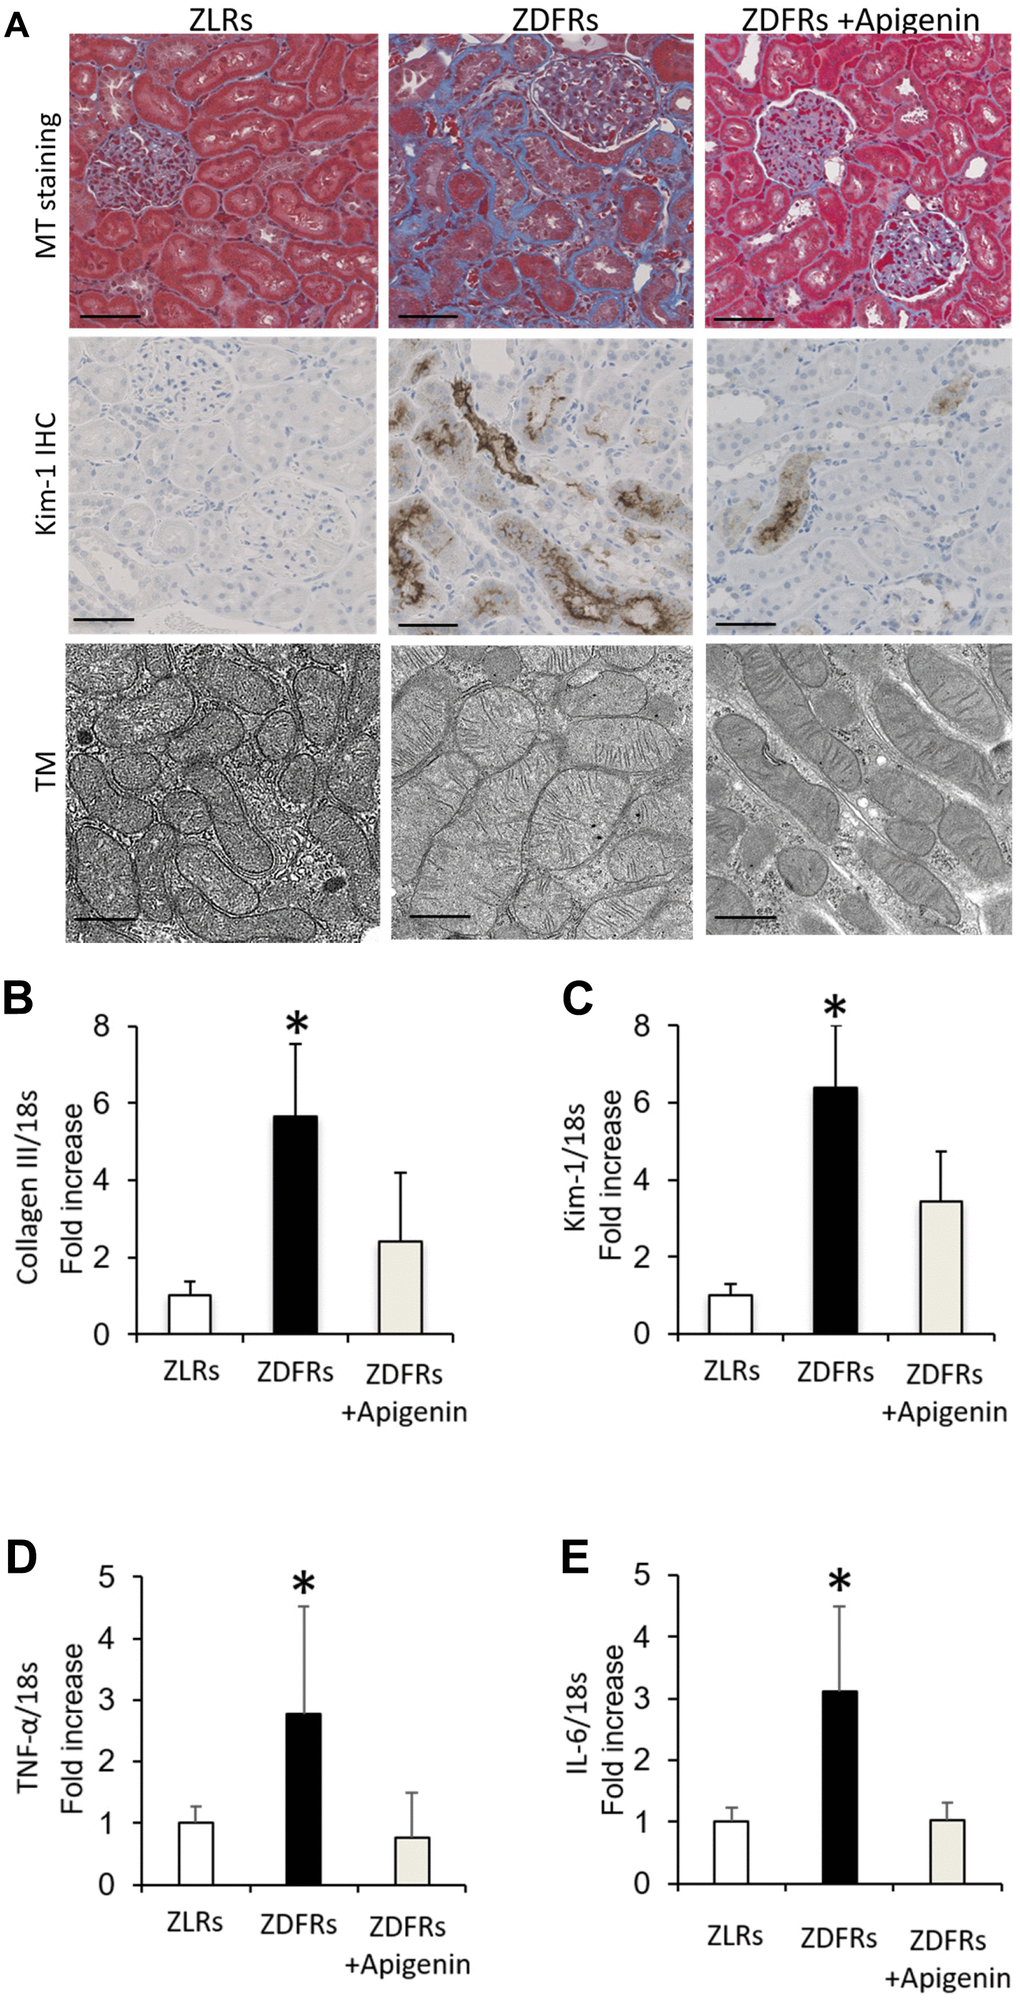 Apigenin ameliorates renal fibrosis and inflammatory gene expression in diabetic rats. (A) Representative photographs of MT staining (scale bar: 100 μm) and IHC of Kim-1 in the tubulointerstitial area (scale bar: 100 μm) and the mitochondrial morphology observed under transmission electron microscopy (TM) scale bar: 500 nm). (B–E) Quantitative RT-PCR of collagen III (B), Kim-1 (C), TNF-α (D), and IL-6 (E) mRNA normalized to expression of 18S, in the renal cortex (n=6). All data represent the mean ± standard deviation (SD). *p